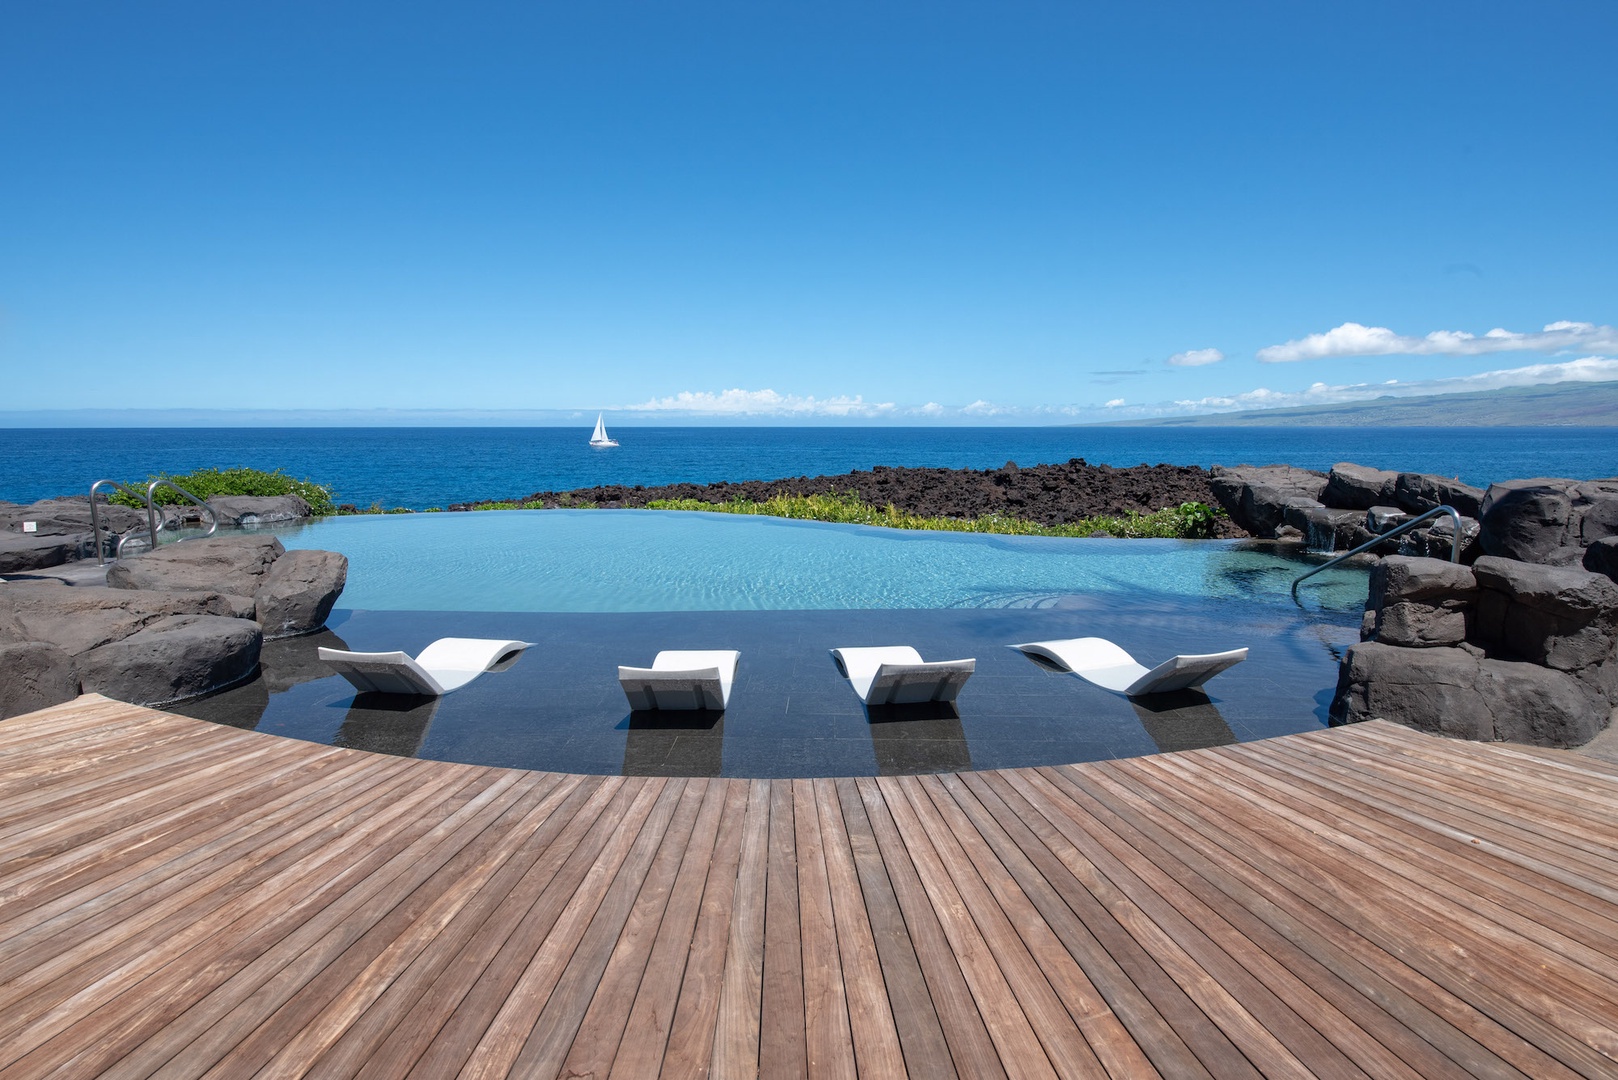 Kamuela Vacation Rentals, 3BD OneOcean (1C) at Mauna Lani Resort - The Grotto Amenity Center w/ Pools, Jacuzzis and Endless Breathtaking Ocean Views!